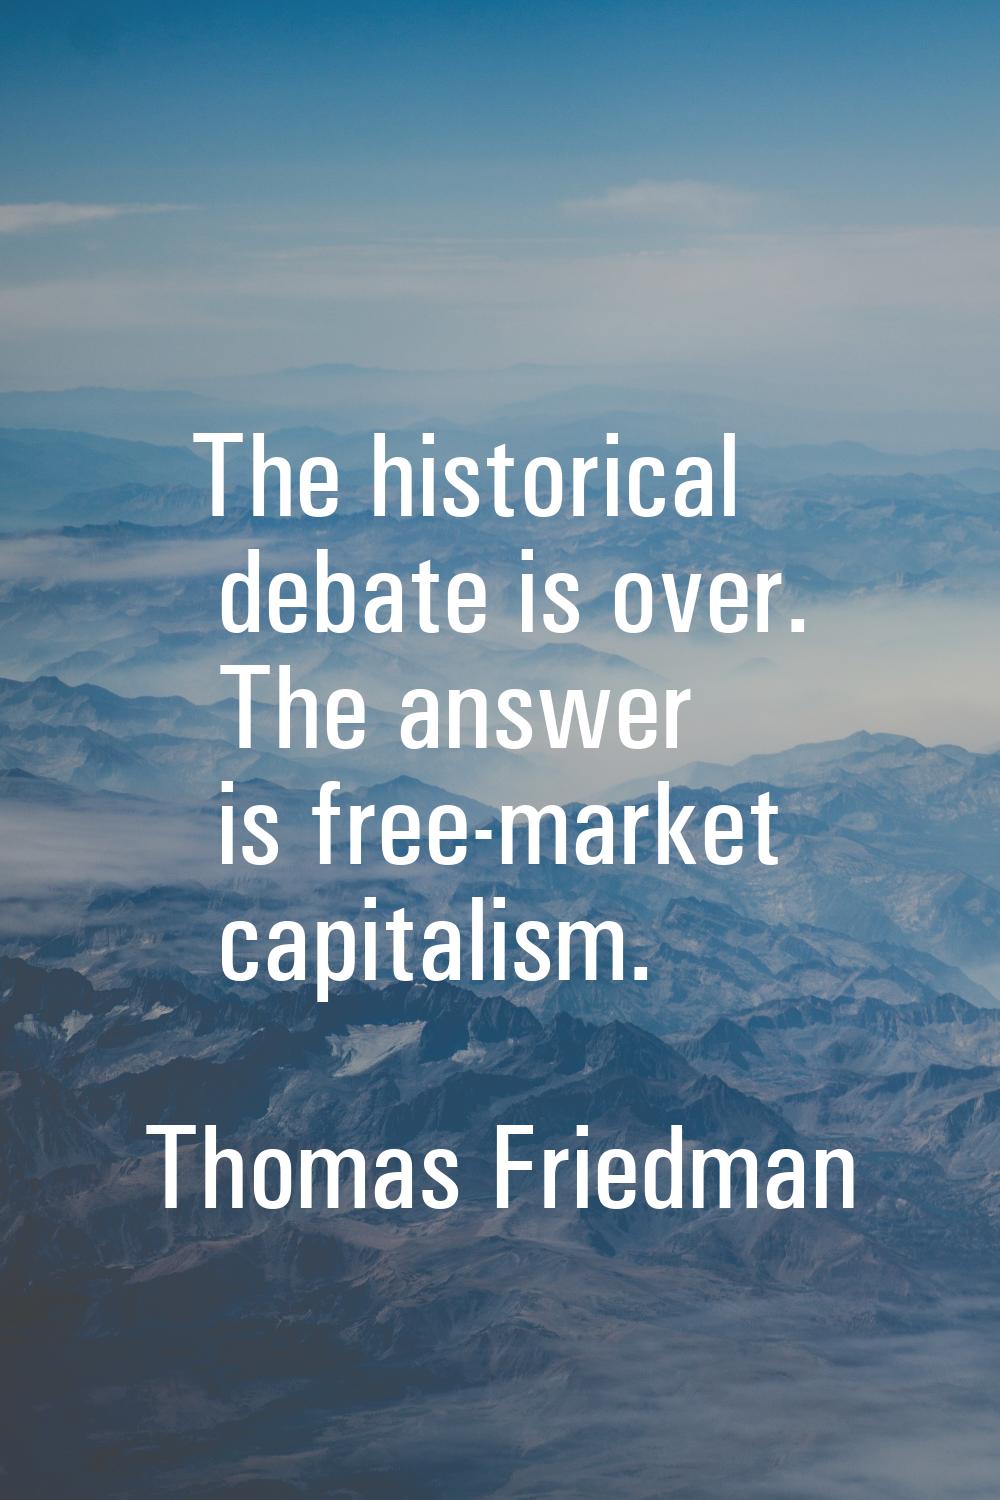 The historical debate is over. The answer is free-market capitalism.